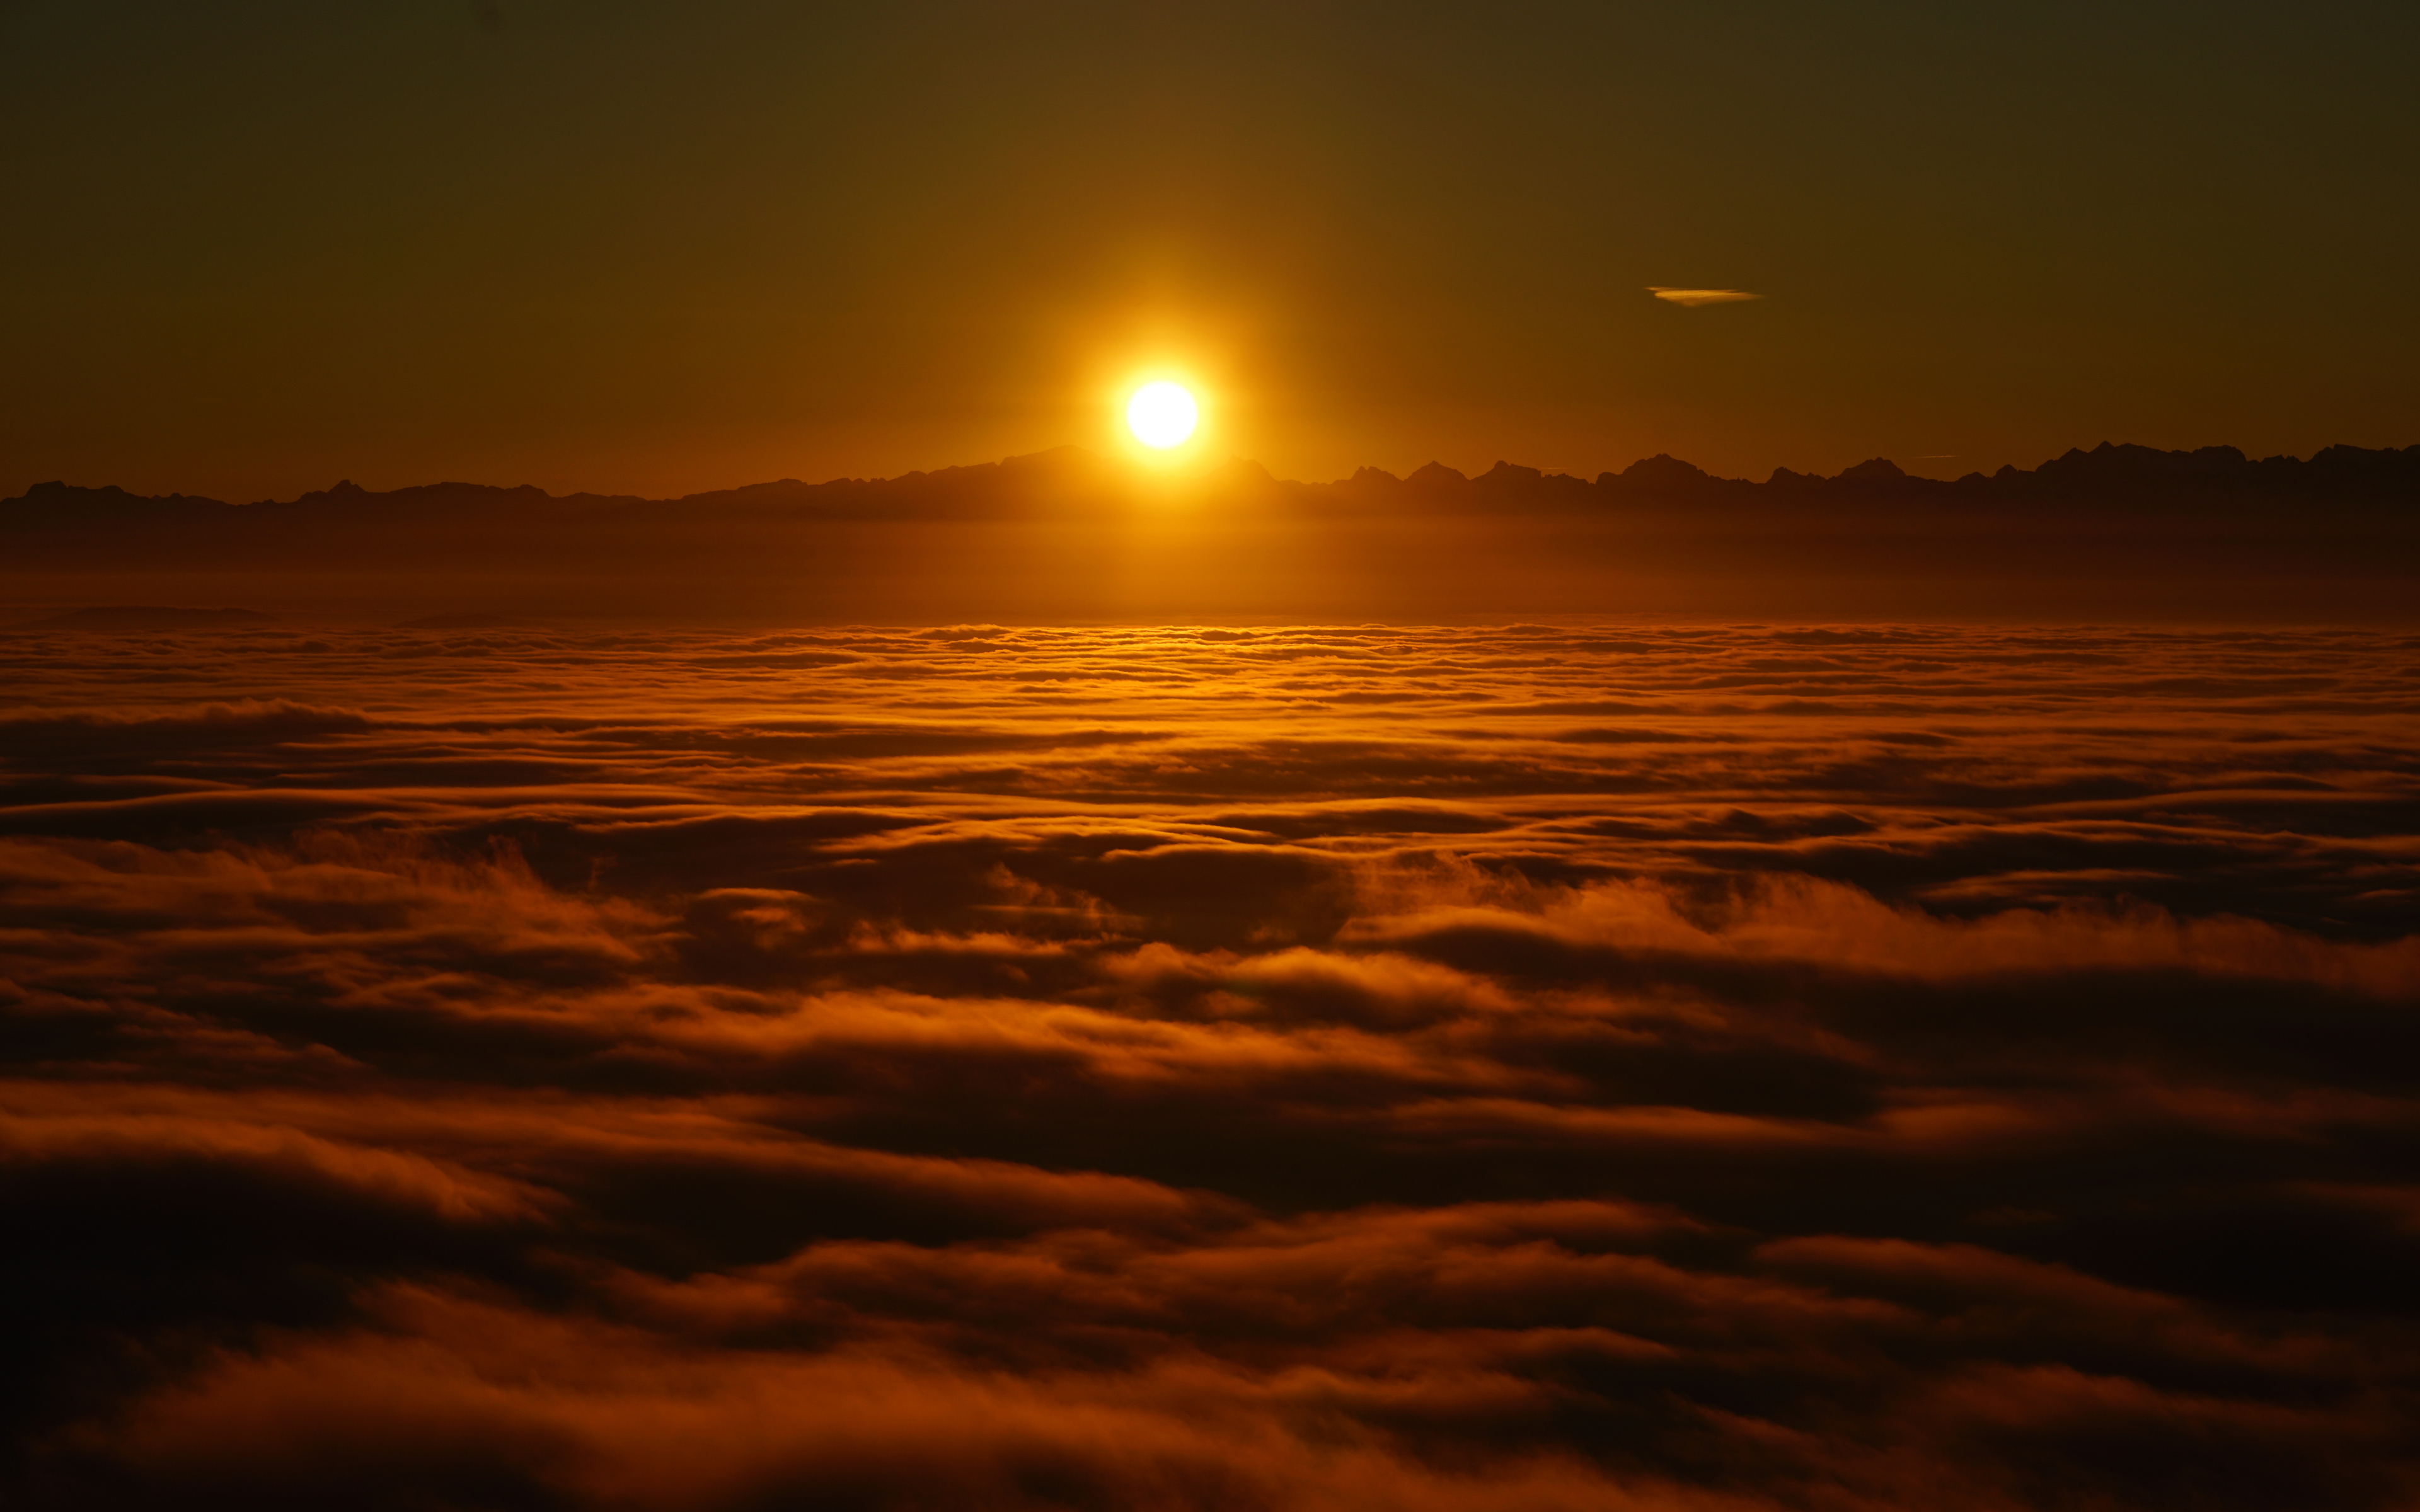 Sunrise above Clouds 4K120574641 - Sunrise above Clouds 4K - sunrise, Hour, Clouds, Above